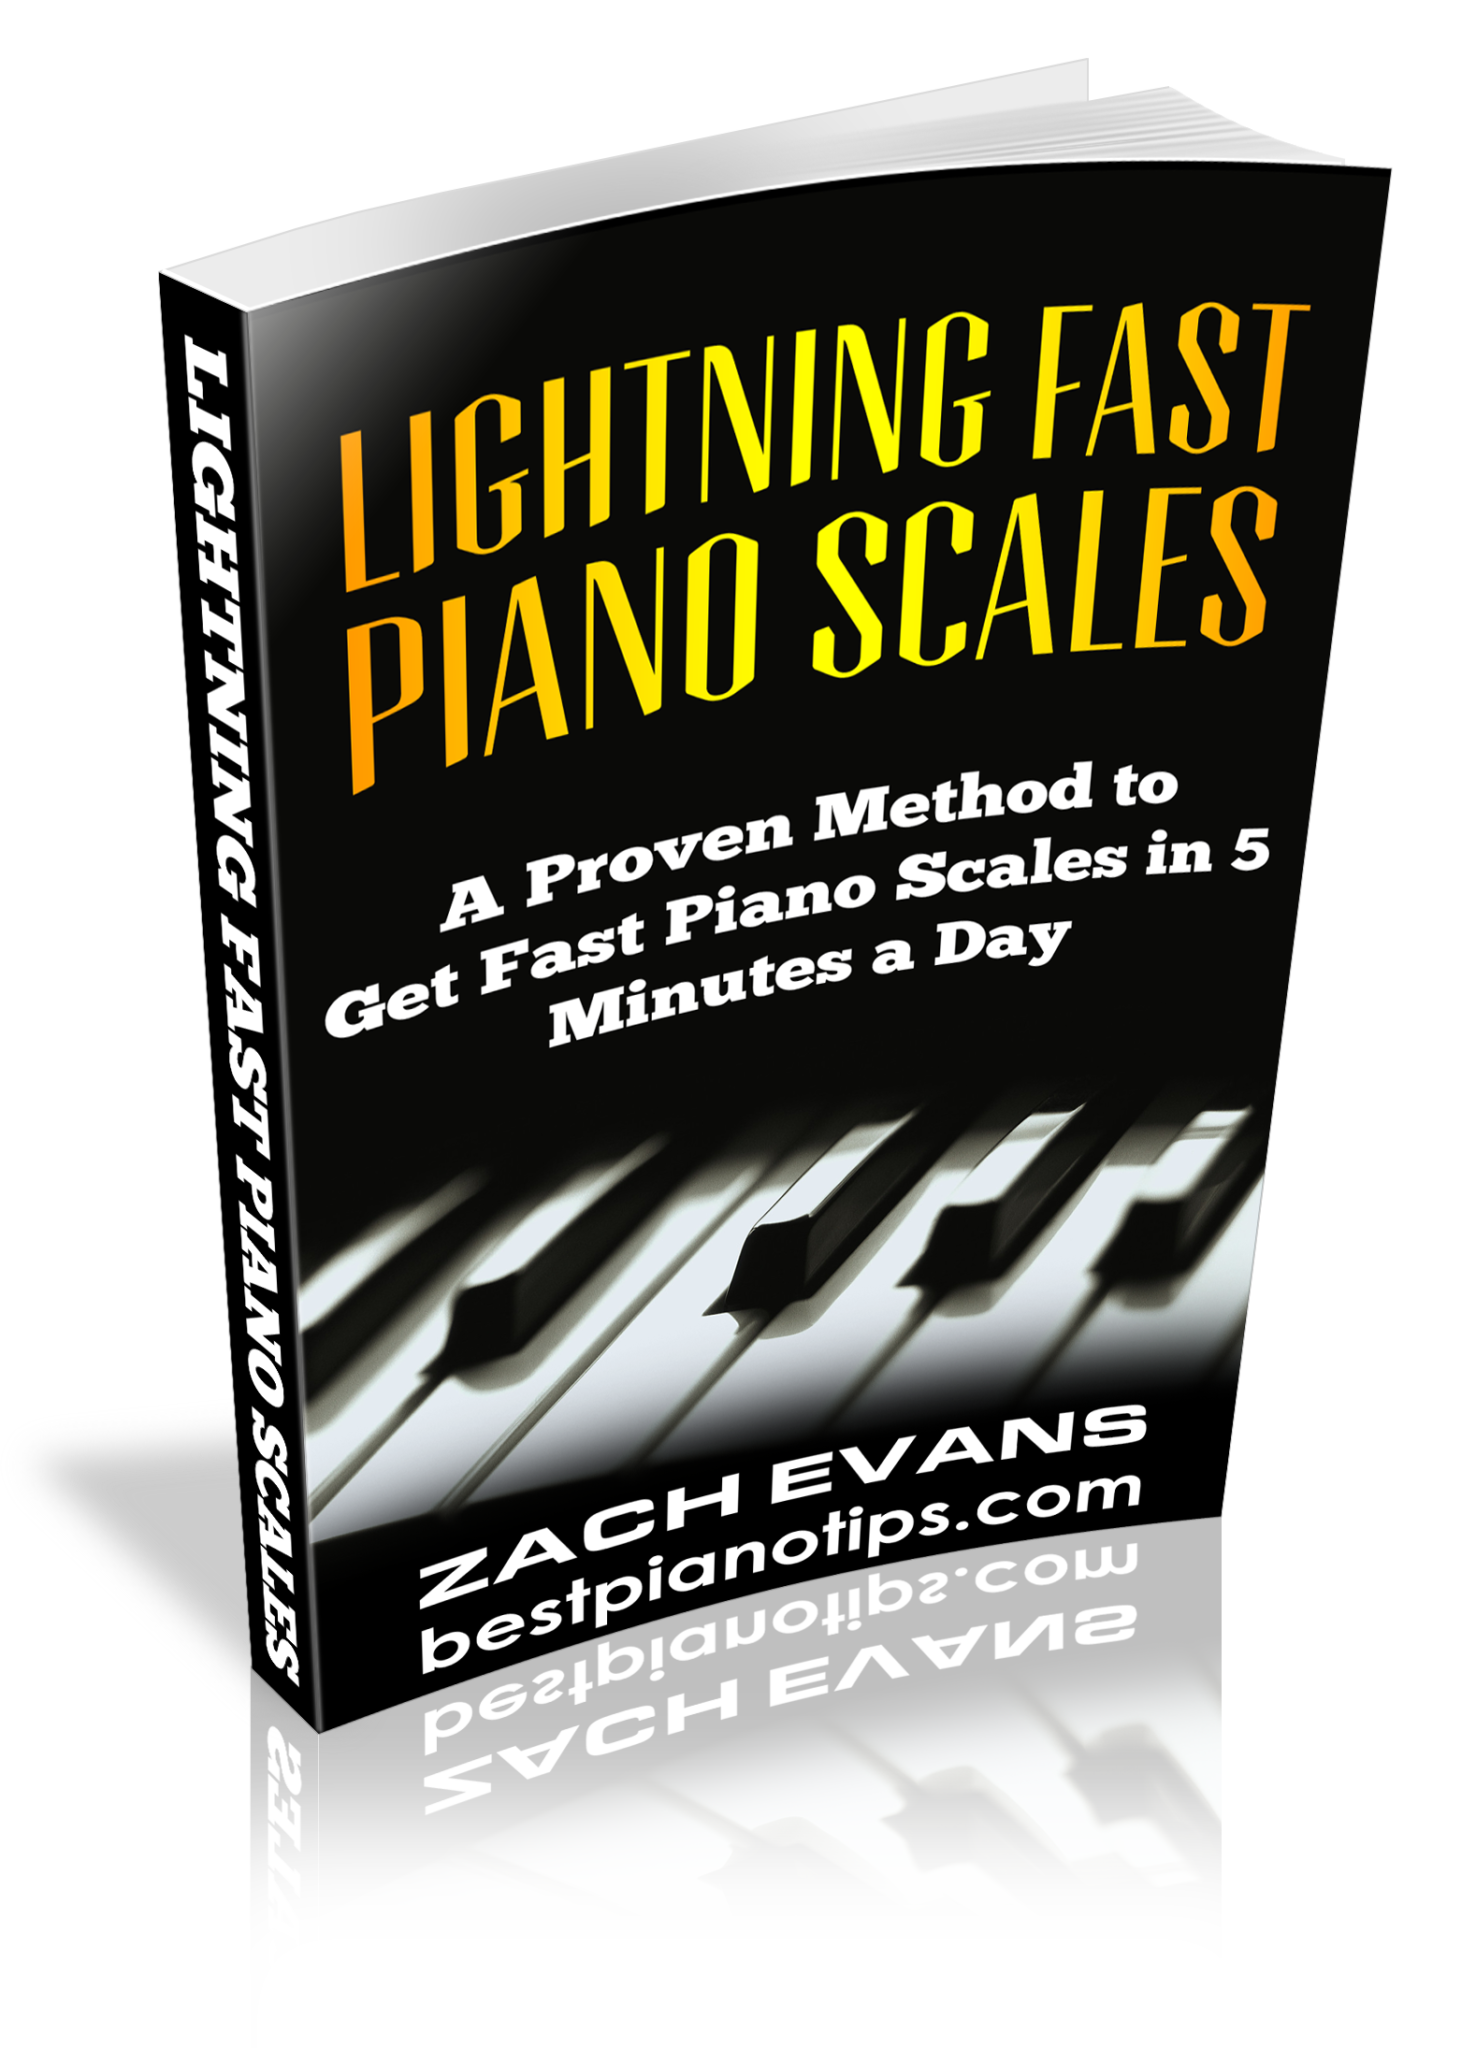 FREE: Lightning Fast Piano Scales: A Proven Method to get Fast Piano Scales in 5 Minutes a Day by Zach Evans